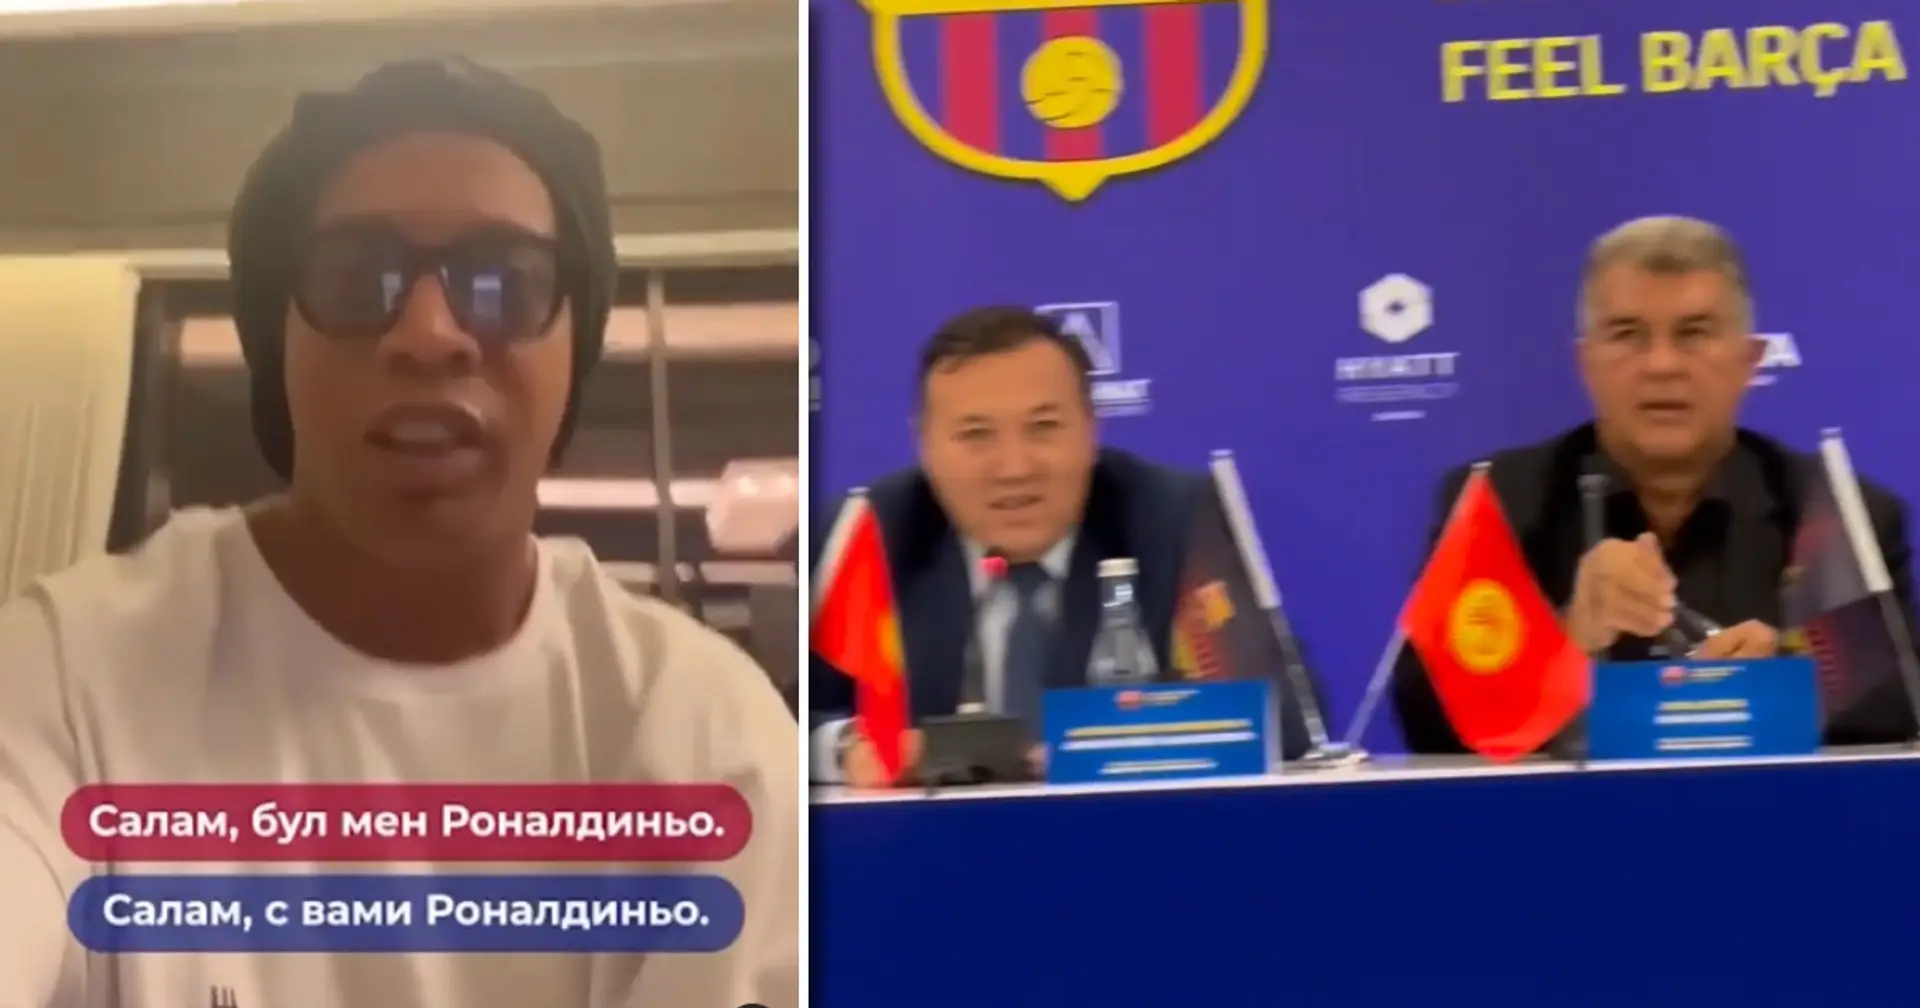 Why is Laporta chilling with Ronaldinho in Central Asian country on transfer deadline? Answered